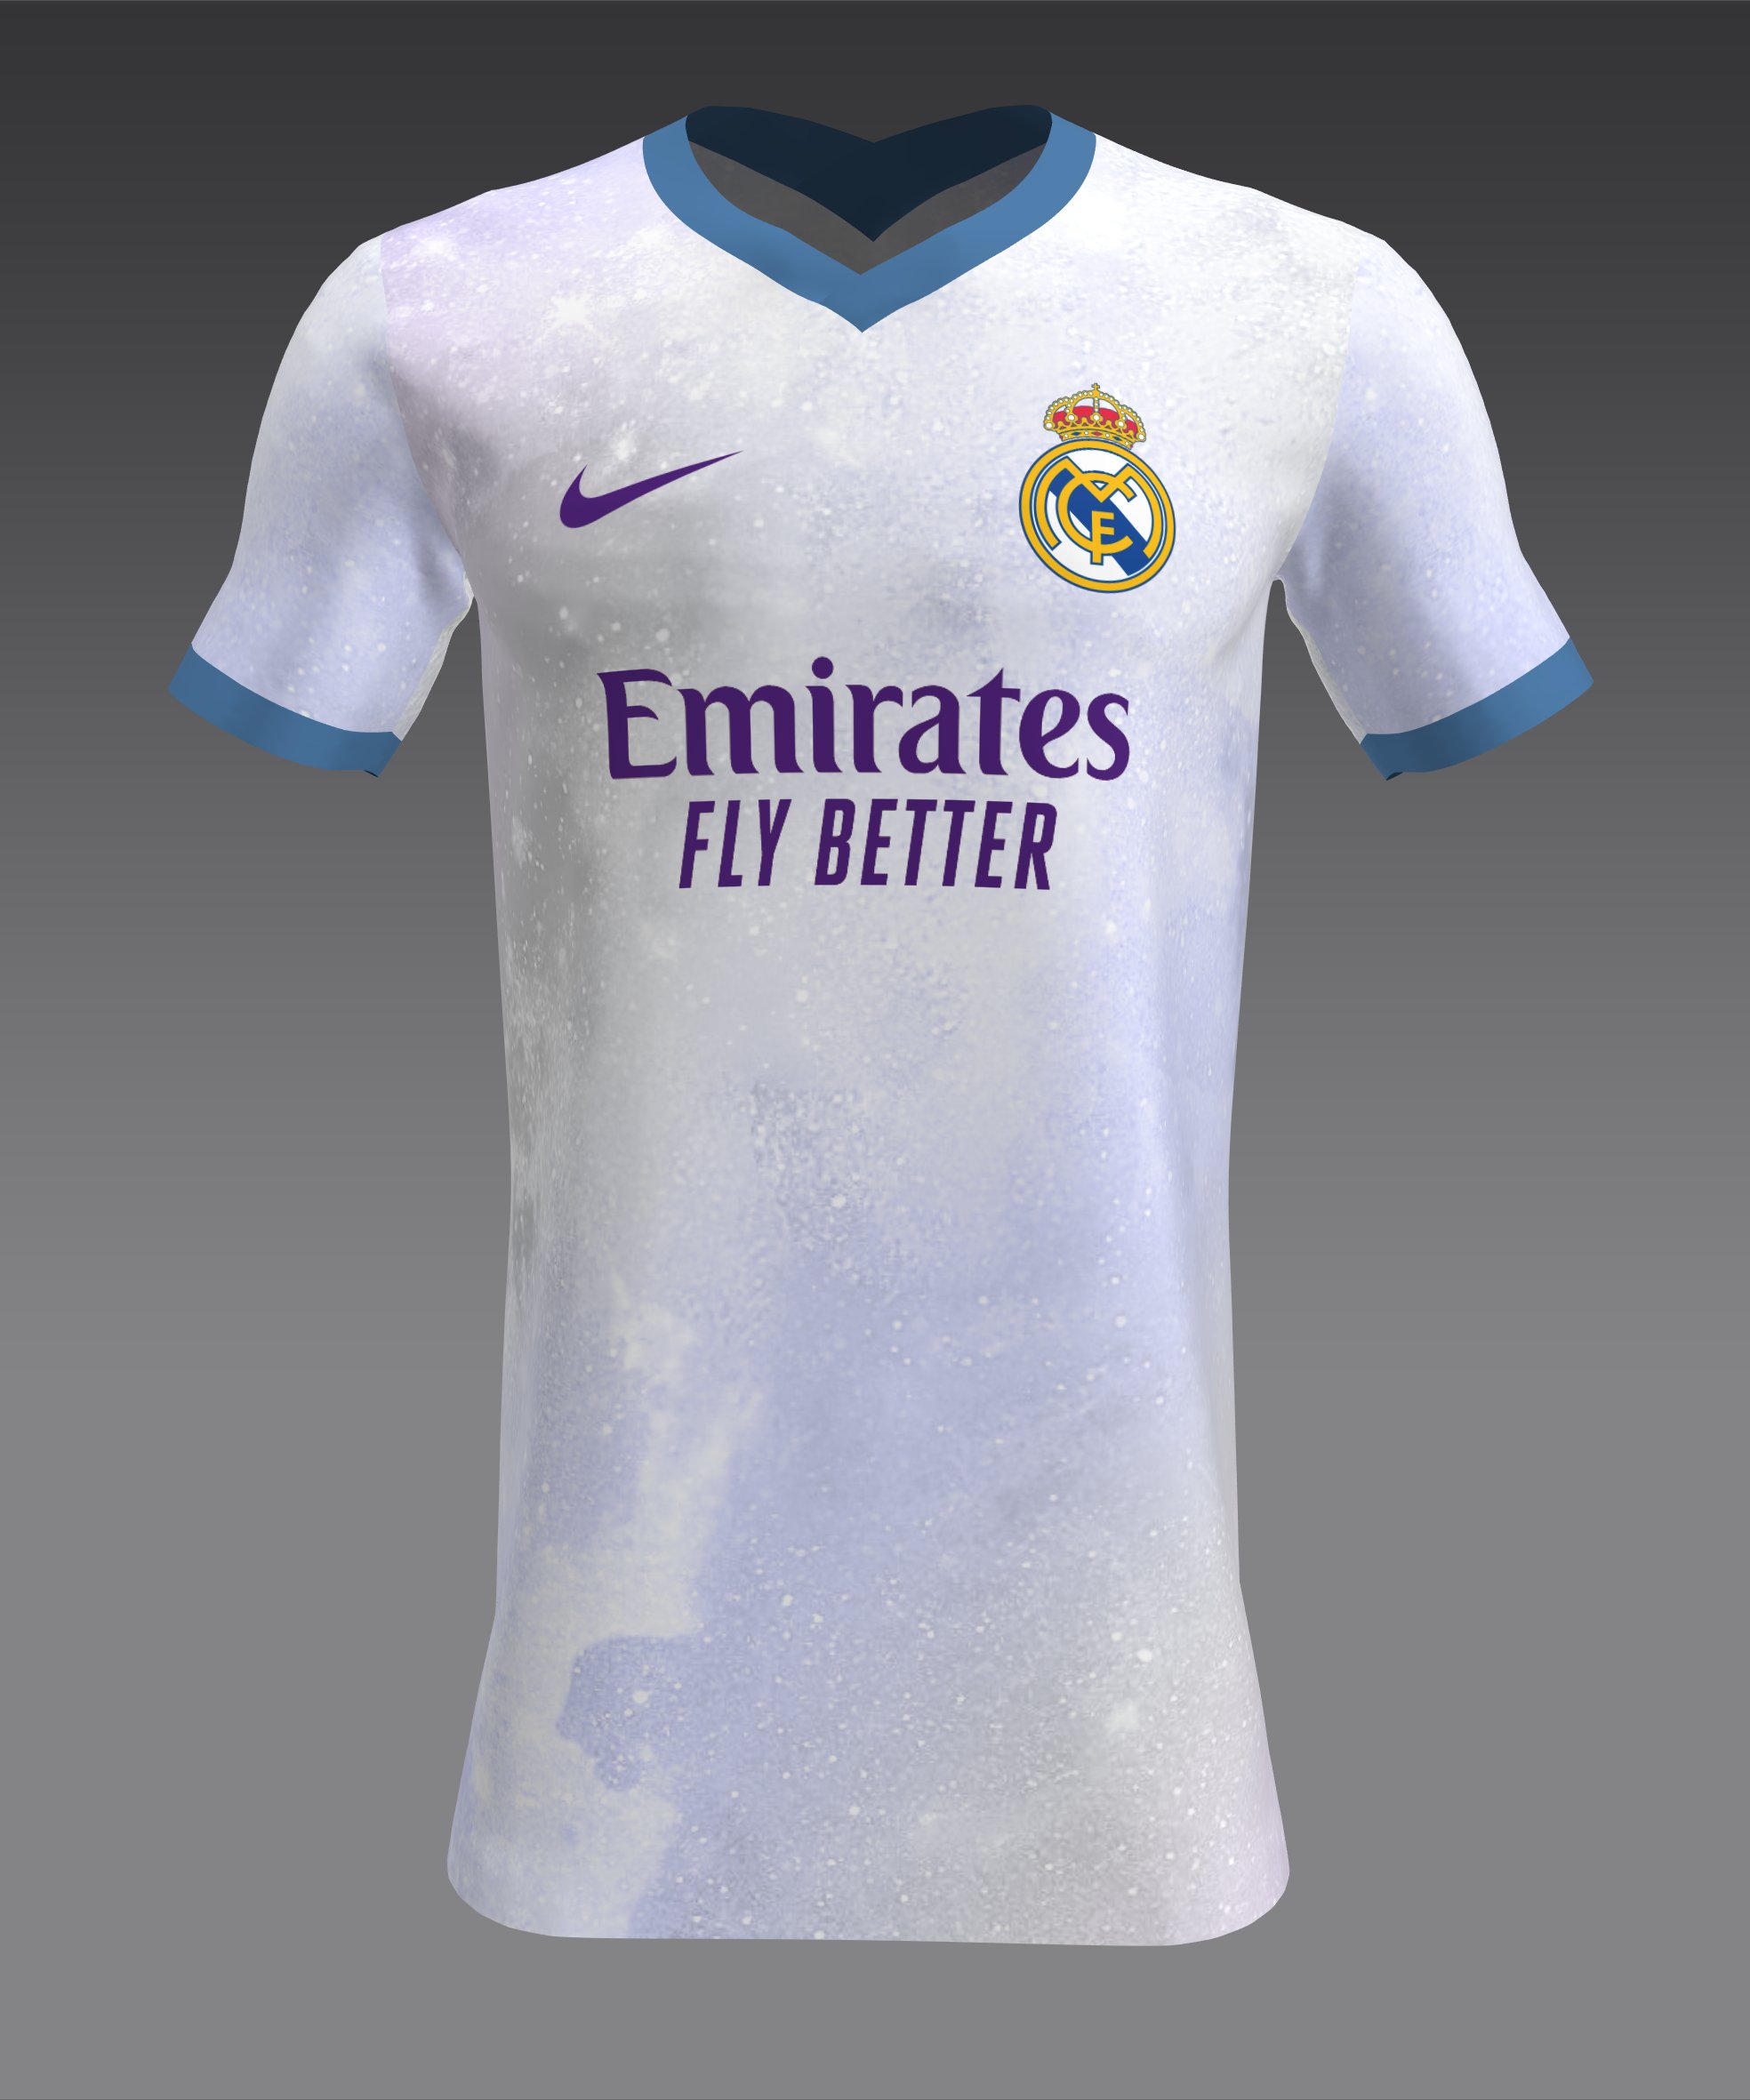 pasos Judías verdes Intestinos Jack Henderson on Twitter: "Made a Nike/Real Madrid concept home kit... I  know, I know, very original. https://t.co/RCRK0Qnem8" / Twitter